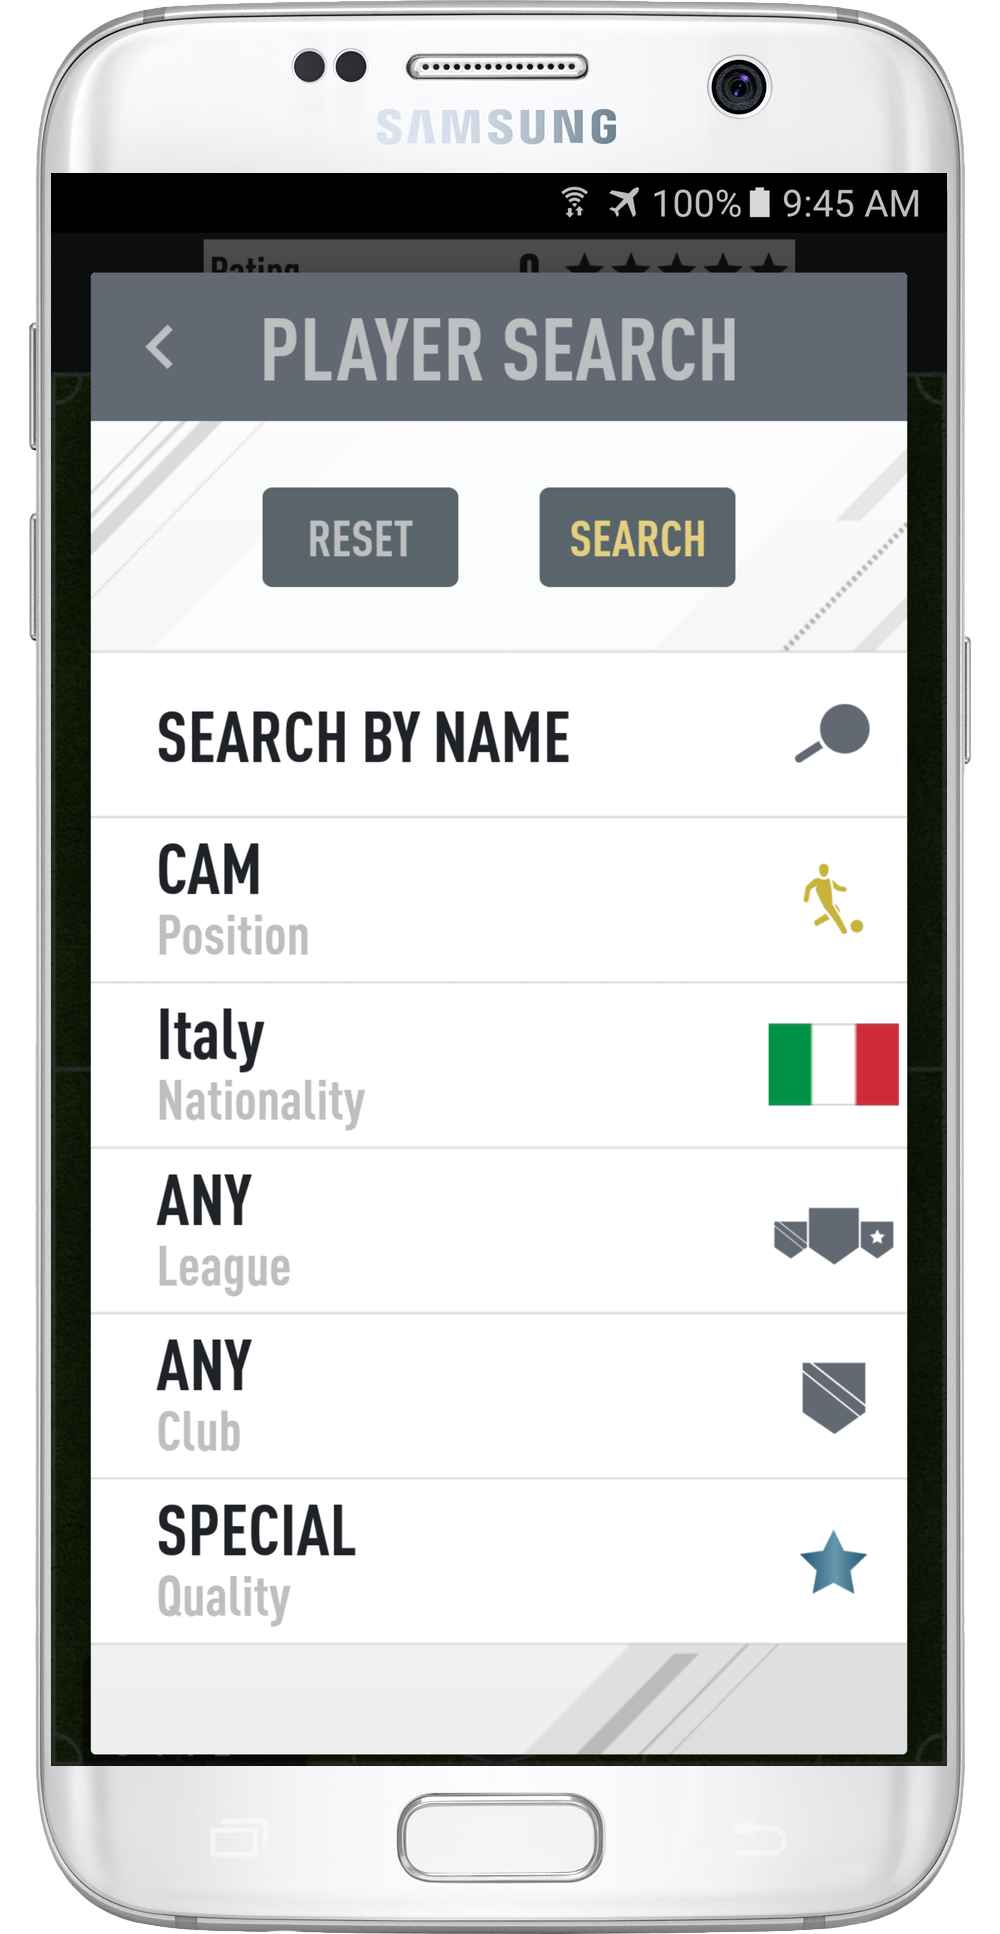 FUT 17 DRAFT by PacyBits APK 2.3 for Android – Download FUT 17 DRAFT by  PacyBits APK Latest Version from APKFab.com